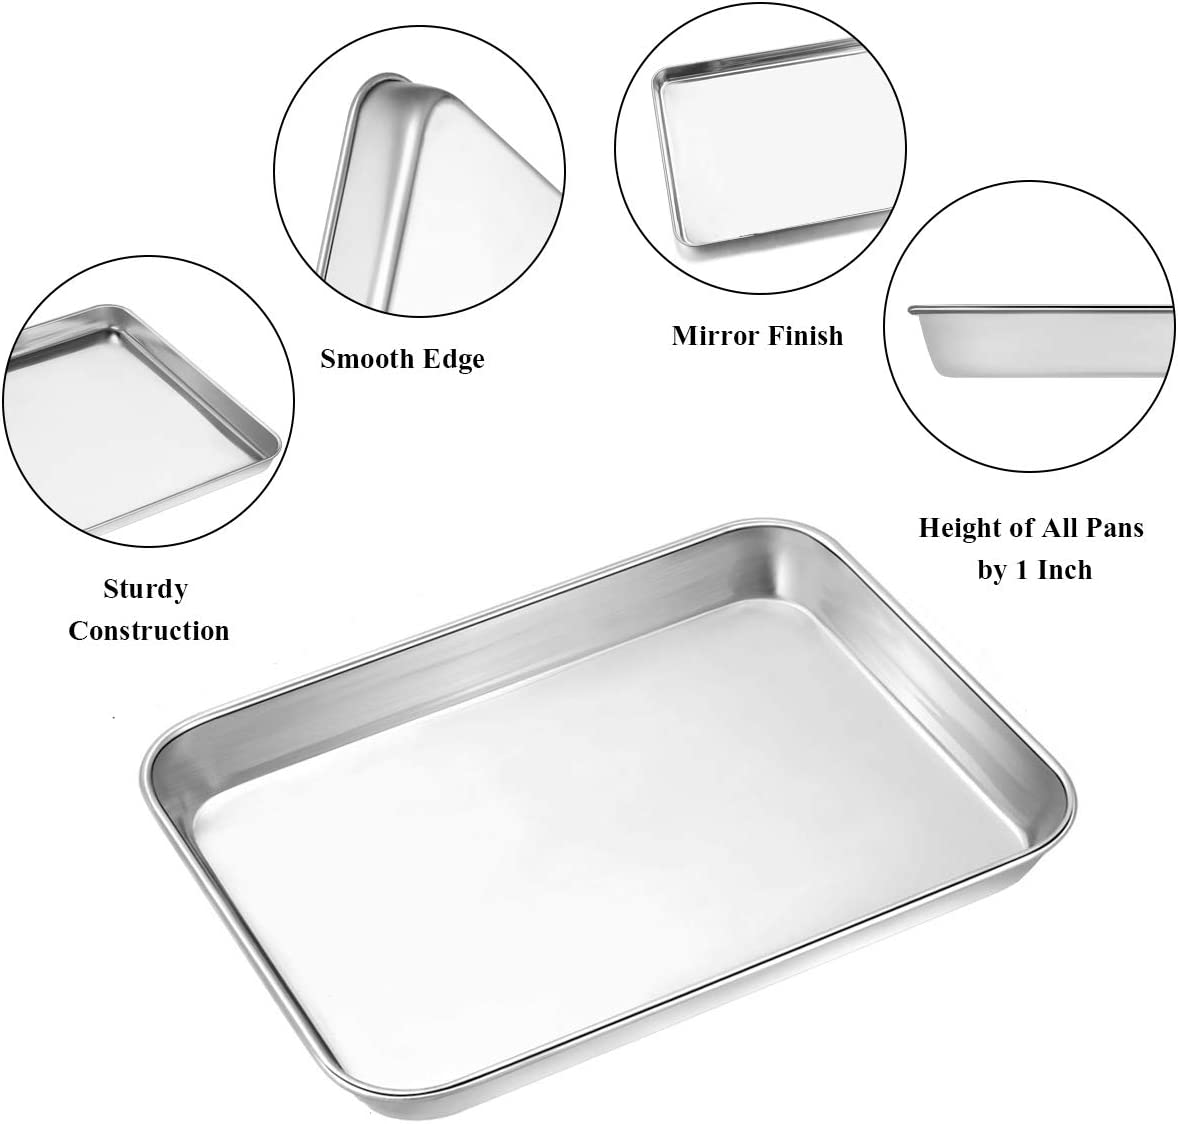 Commercial Baking Sheets, Trays, & Pans